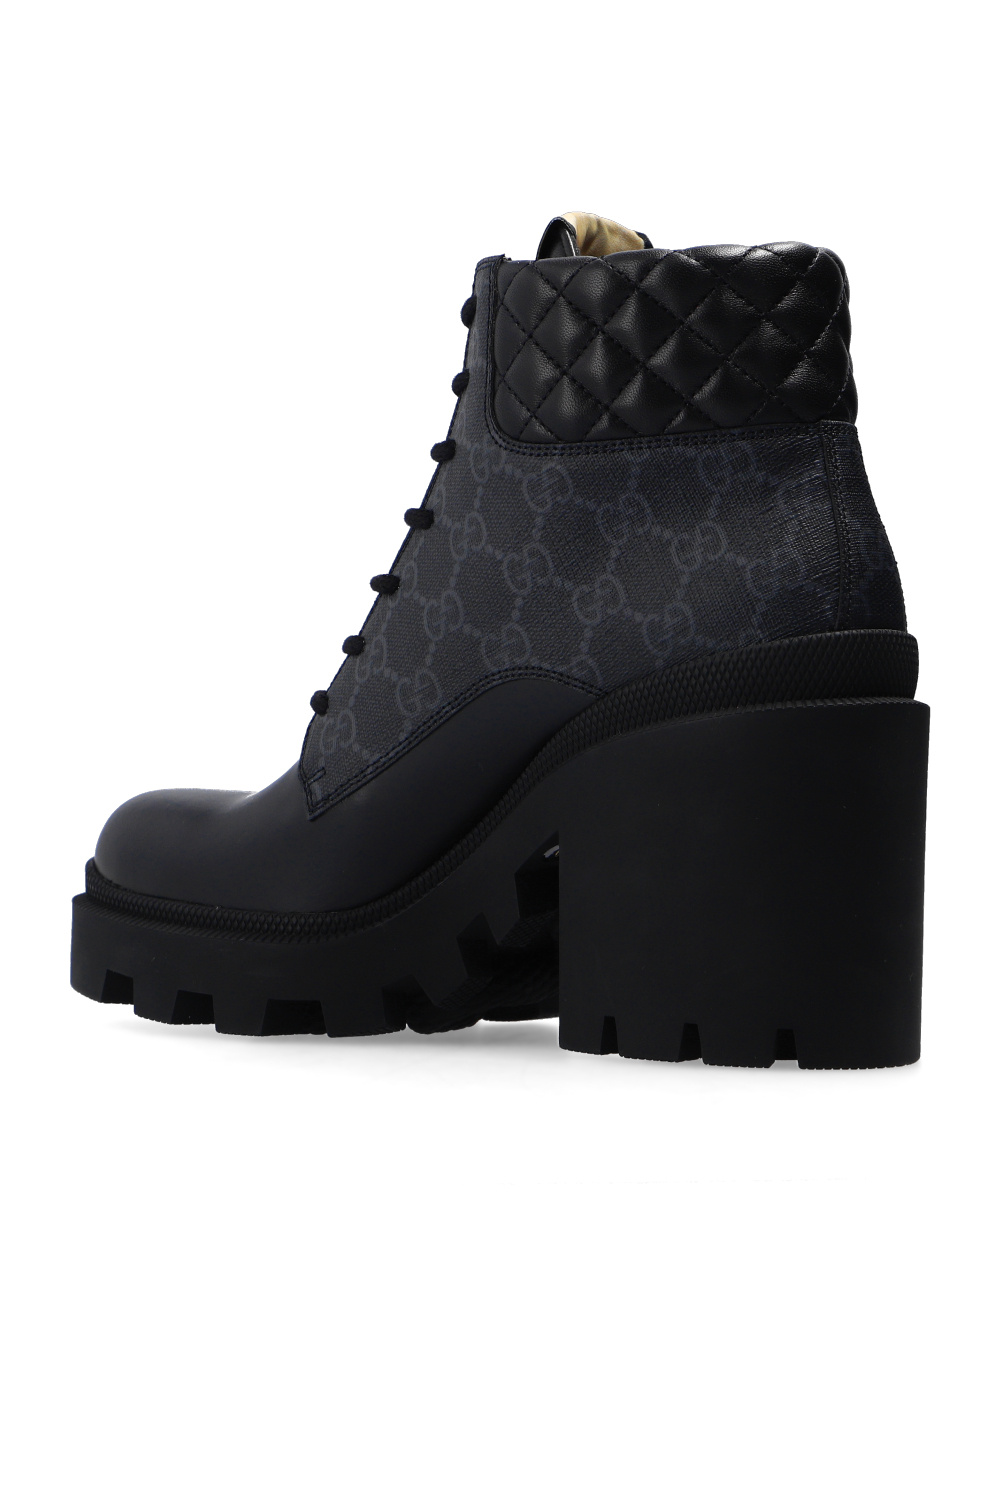 Gucci ‘GG’ heeled boots